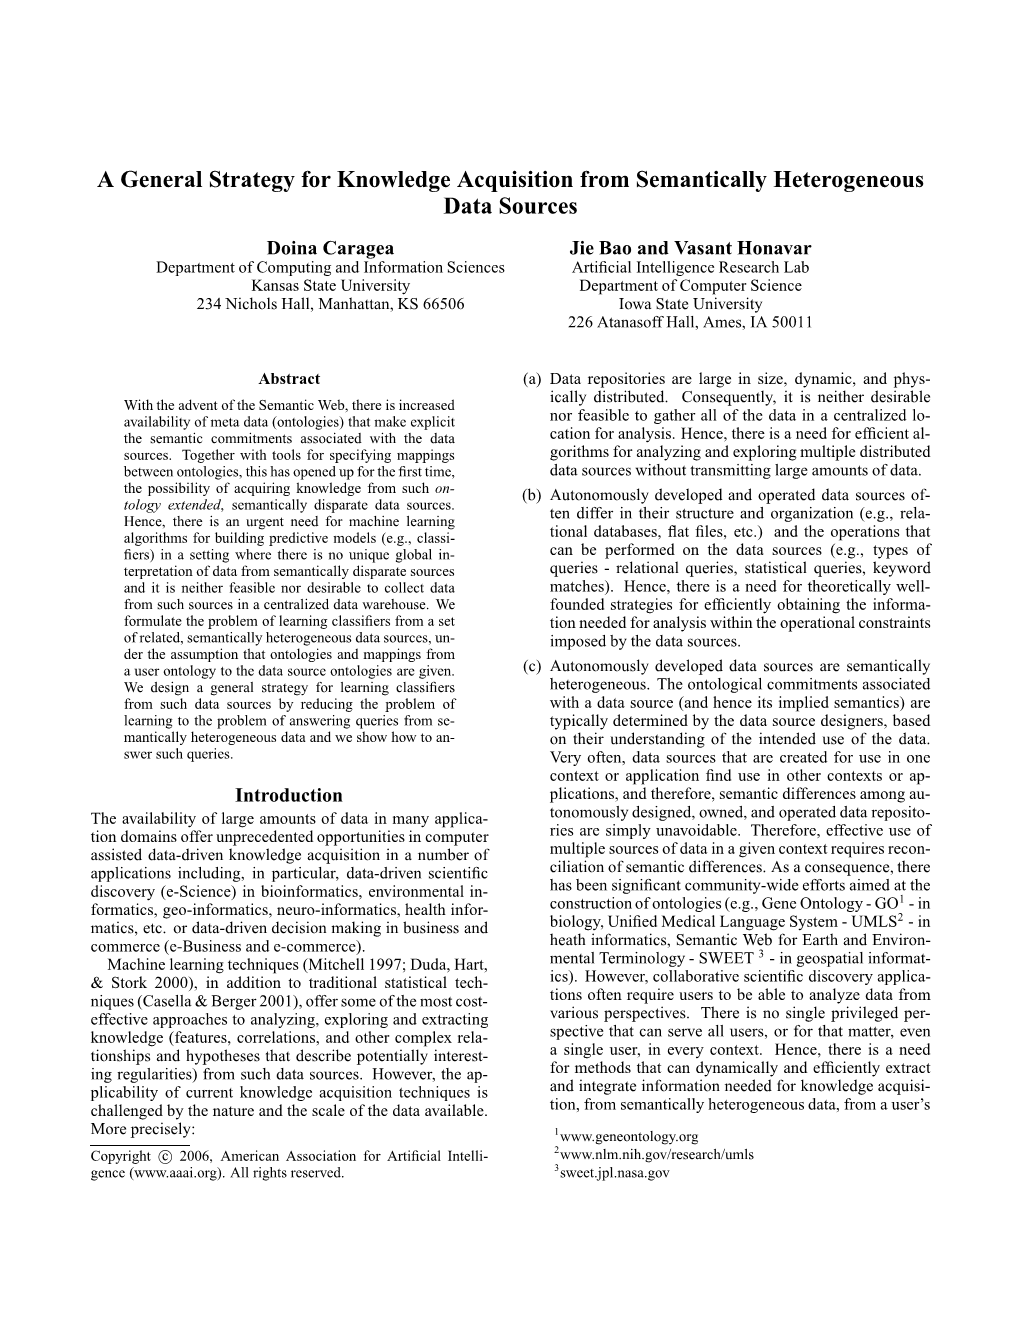 A General Strategy for Knowledge Acquisition from Semantically Heterogeneous Data Sources